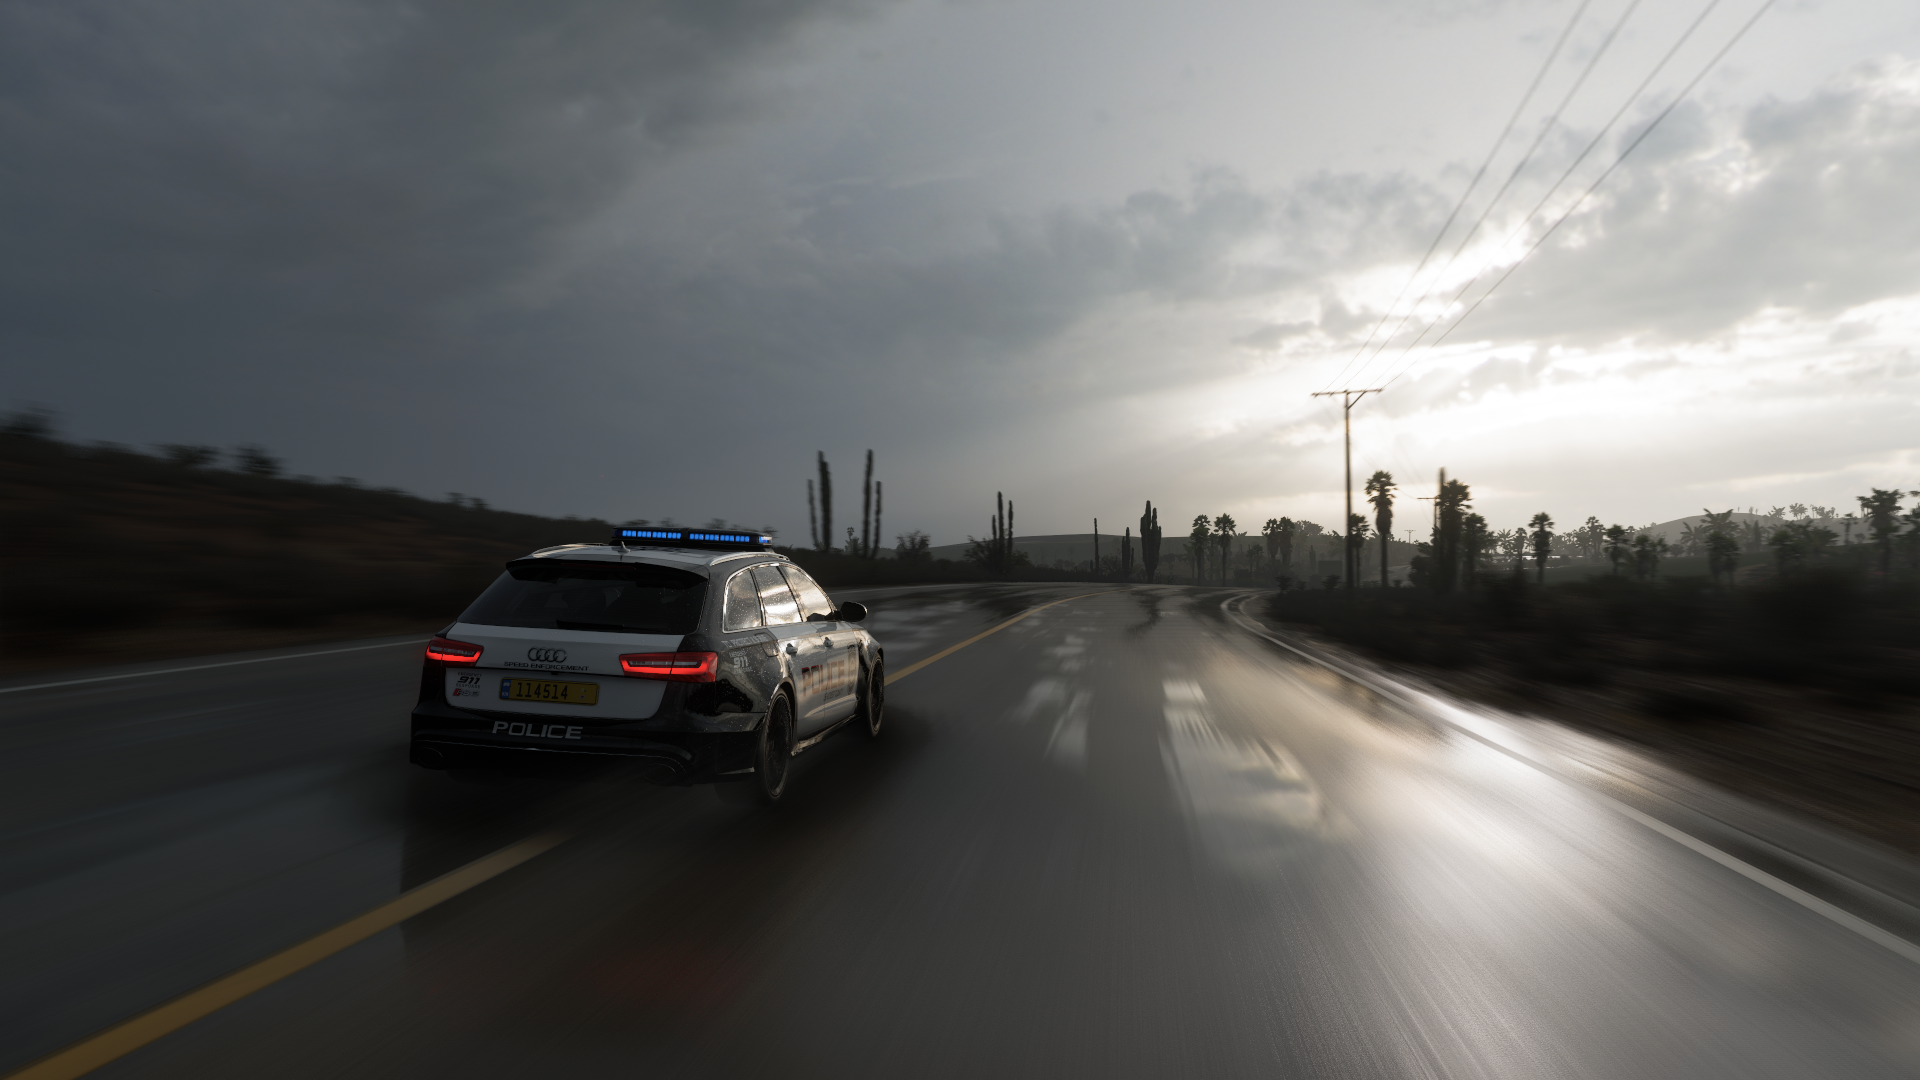 General 1920x1080 Audi Forza Horizon 5 Nvidia RTX digital art video games car police cars road asphalt station wagon Audi RS6 German cars PlaygroundGames sky clouds Volkswagen Group overcast taillights rear view driving video game art screen shot Turn 10 Studios Xbox Game Studios V8 engine